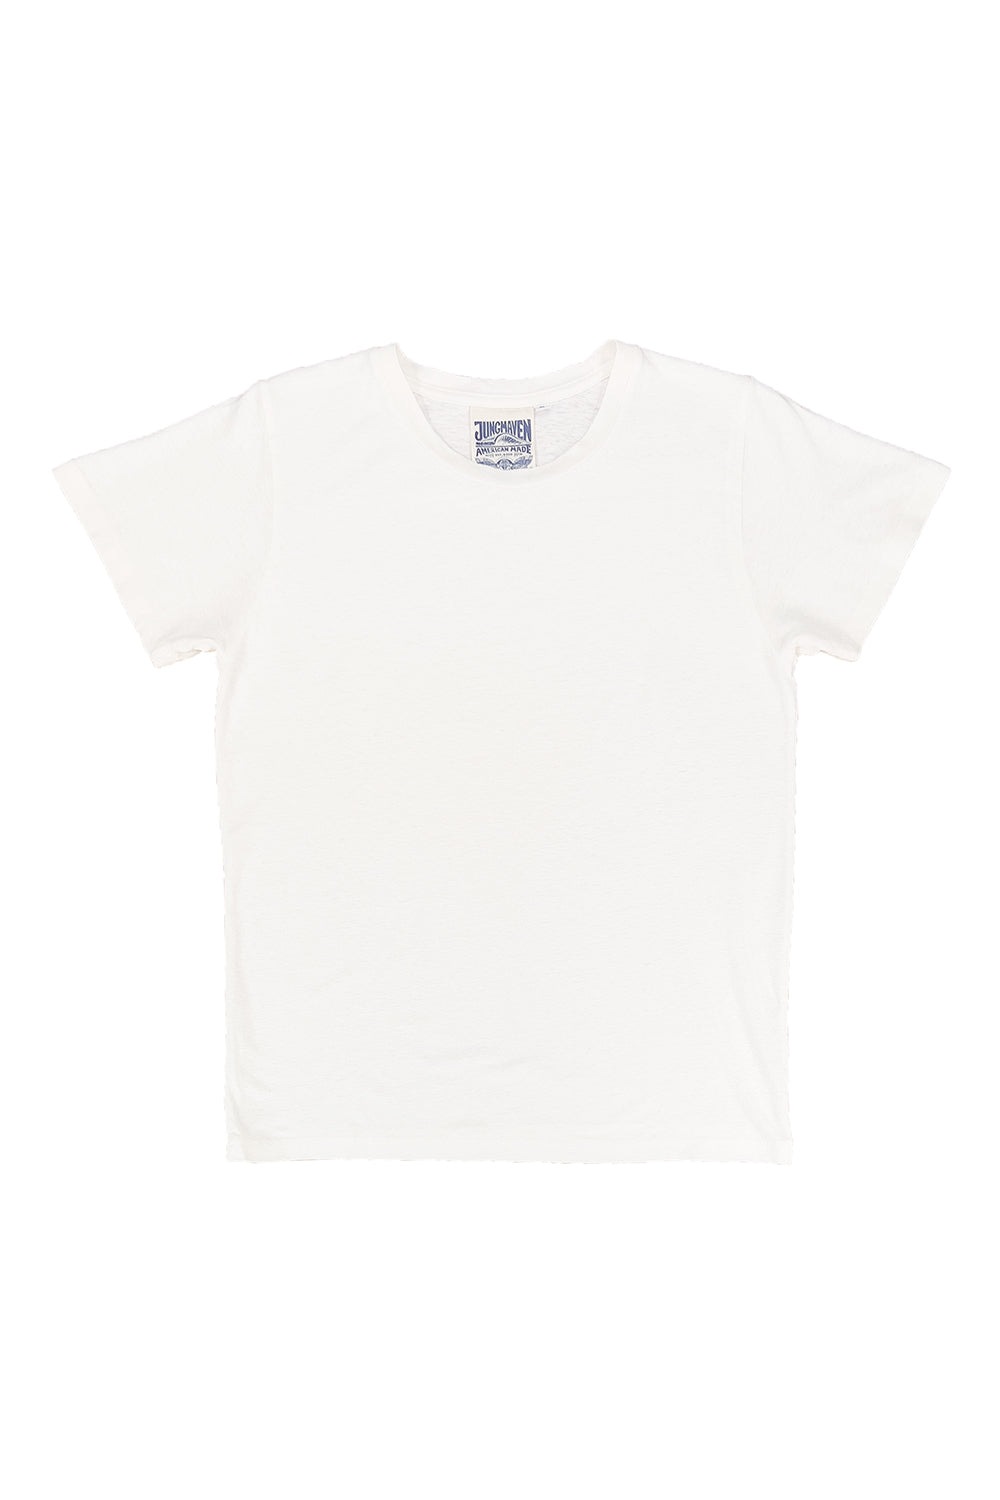 Lorel Tee | Jungmaven Hemp Clothing & Accessories / Color: Washed White